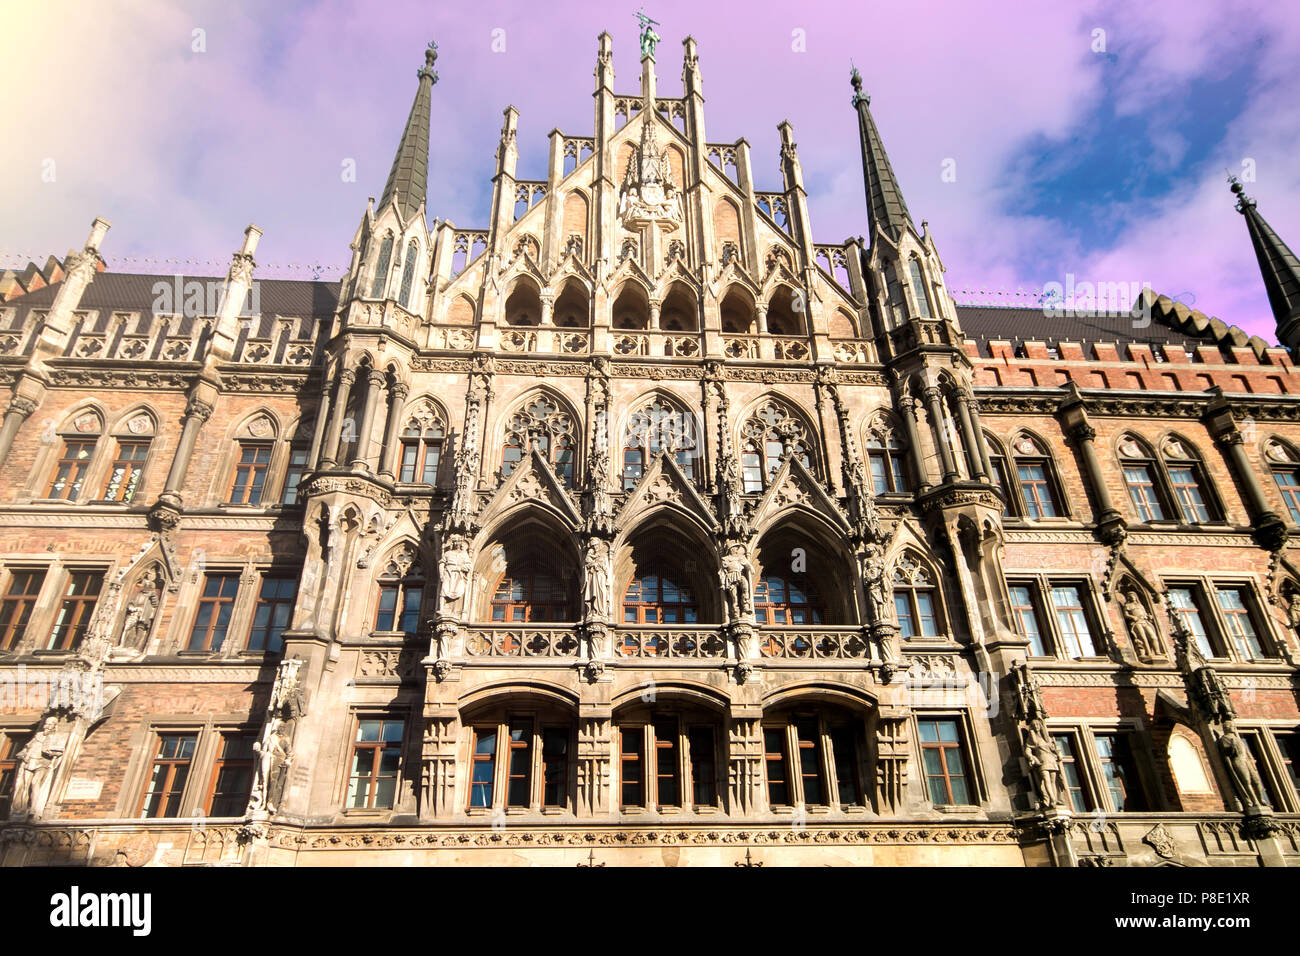 The Neue Rathaus (New City Hall) - magnificent neo-gothic building in Munich at sunset Stock Photo